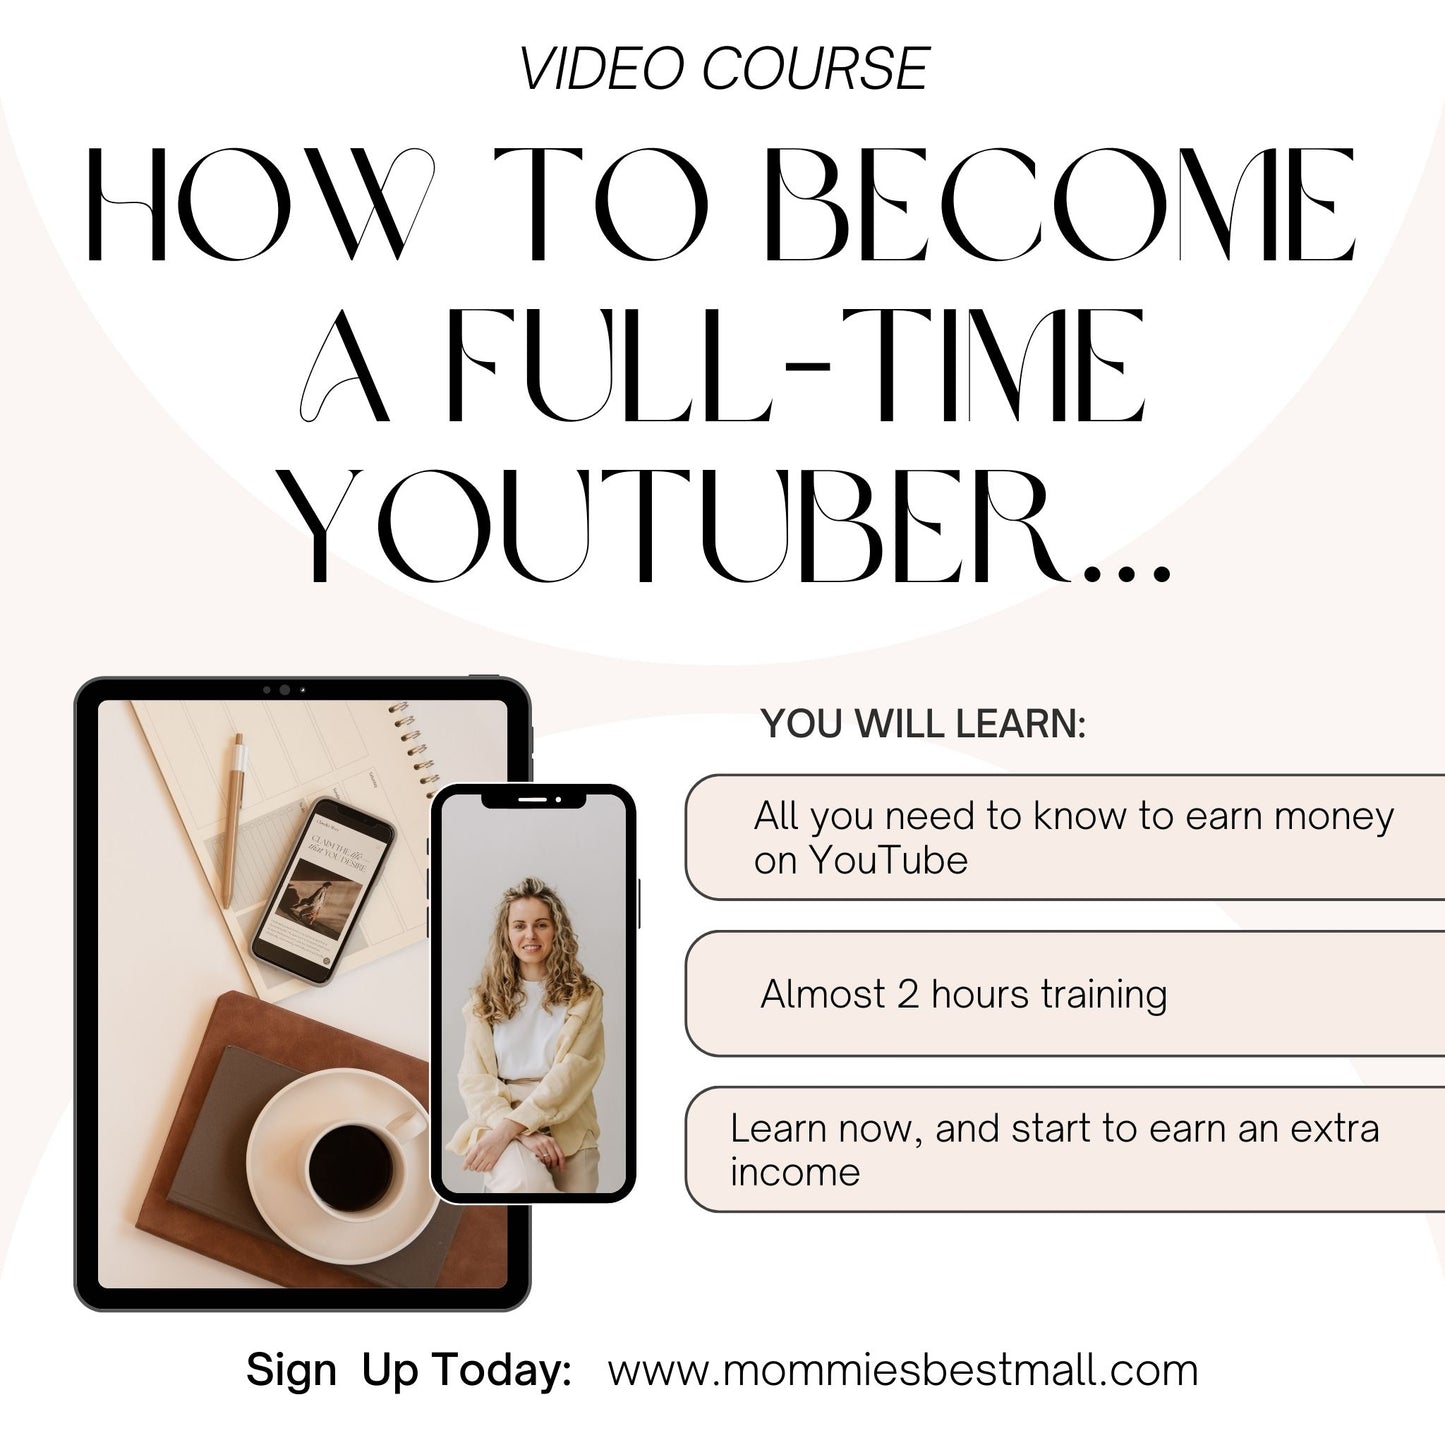 Would you like to earn a full-time income as a YouTuber?